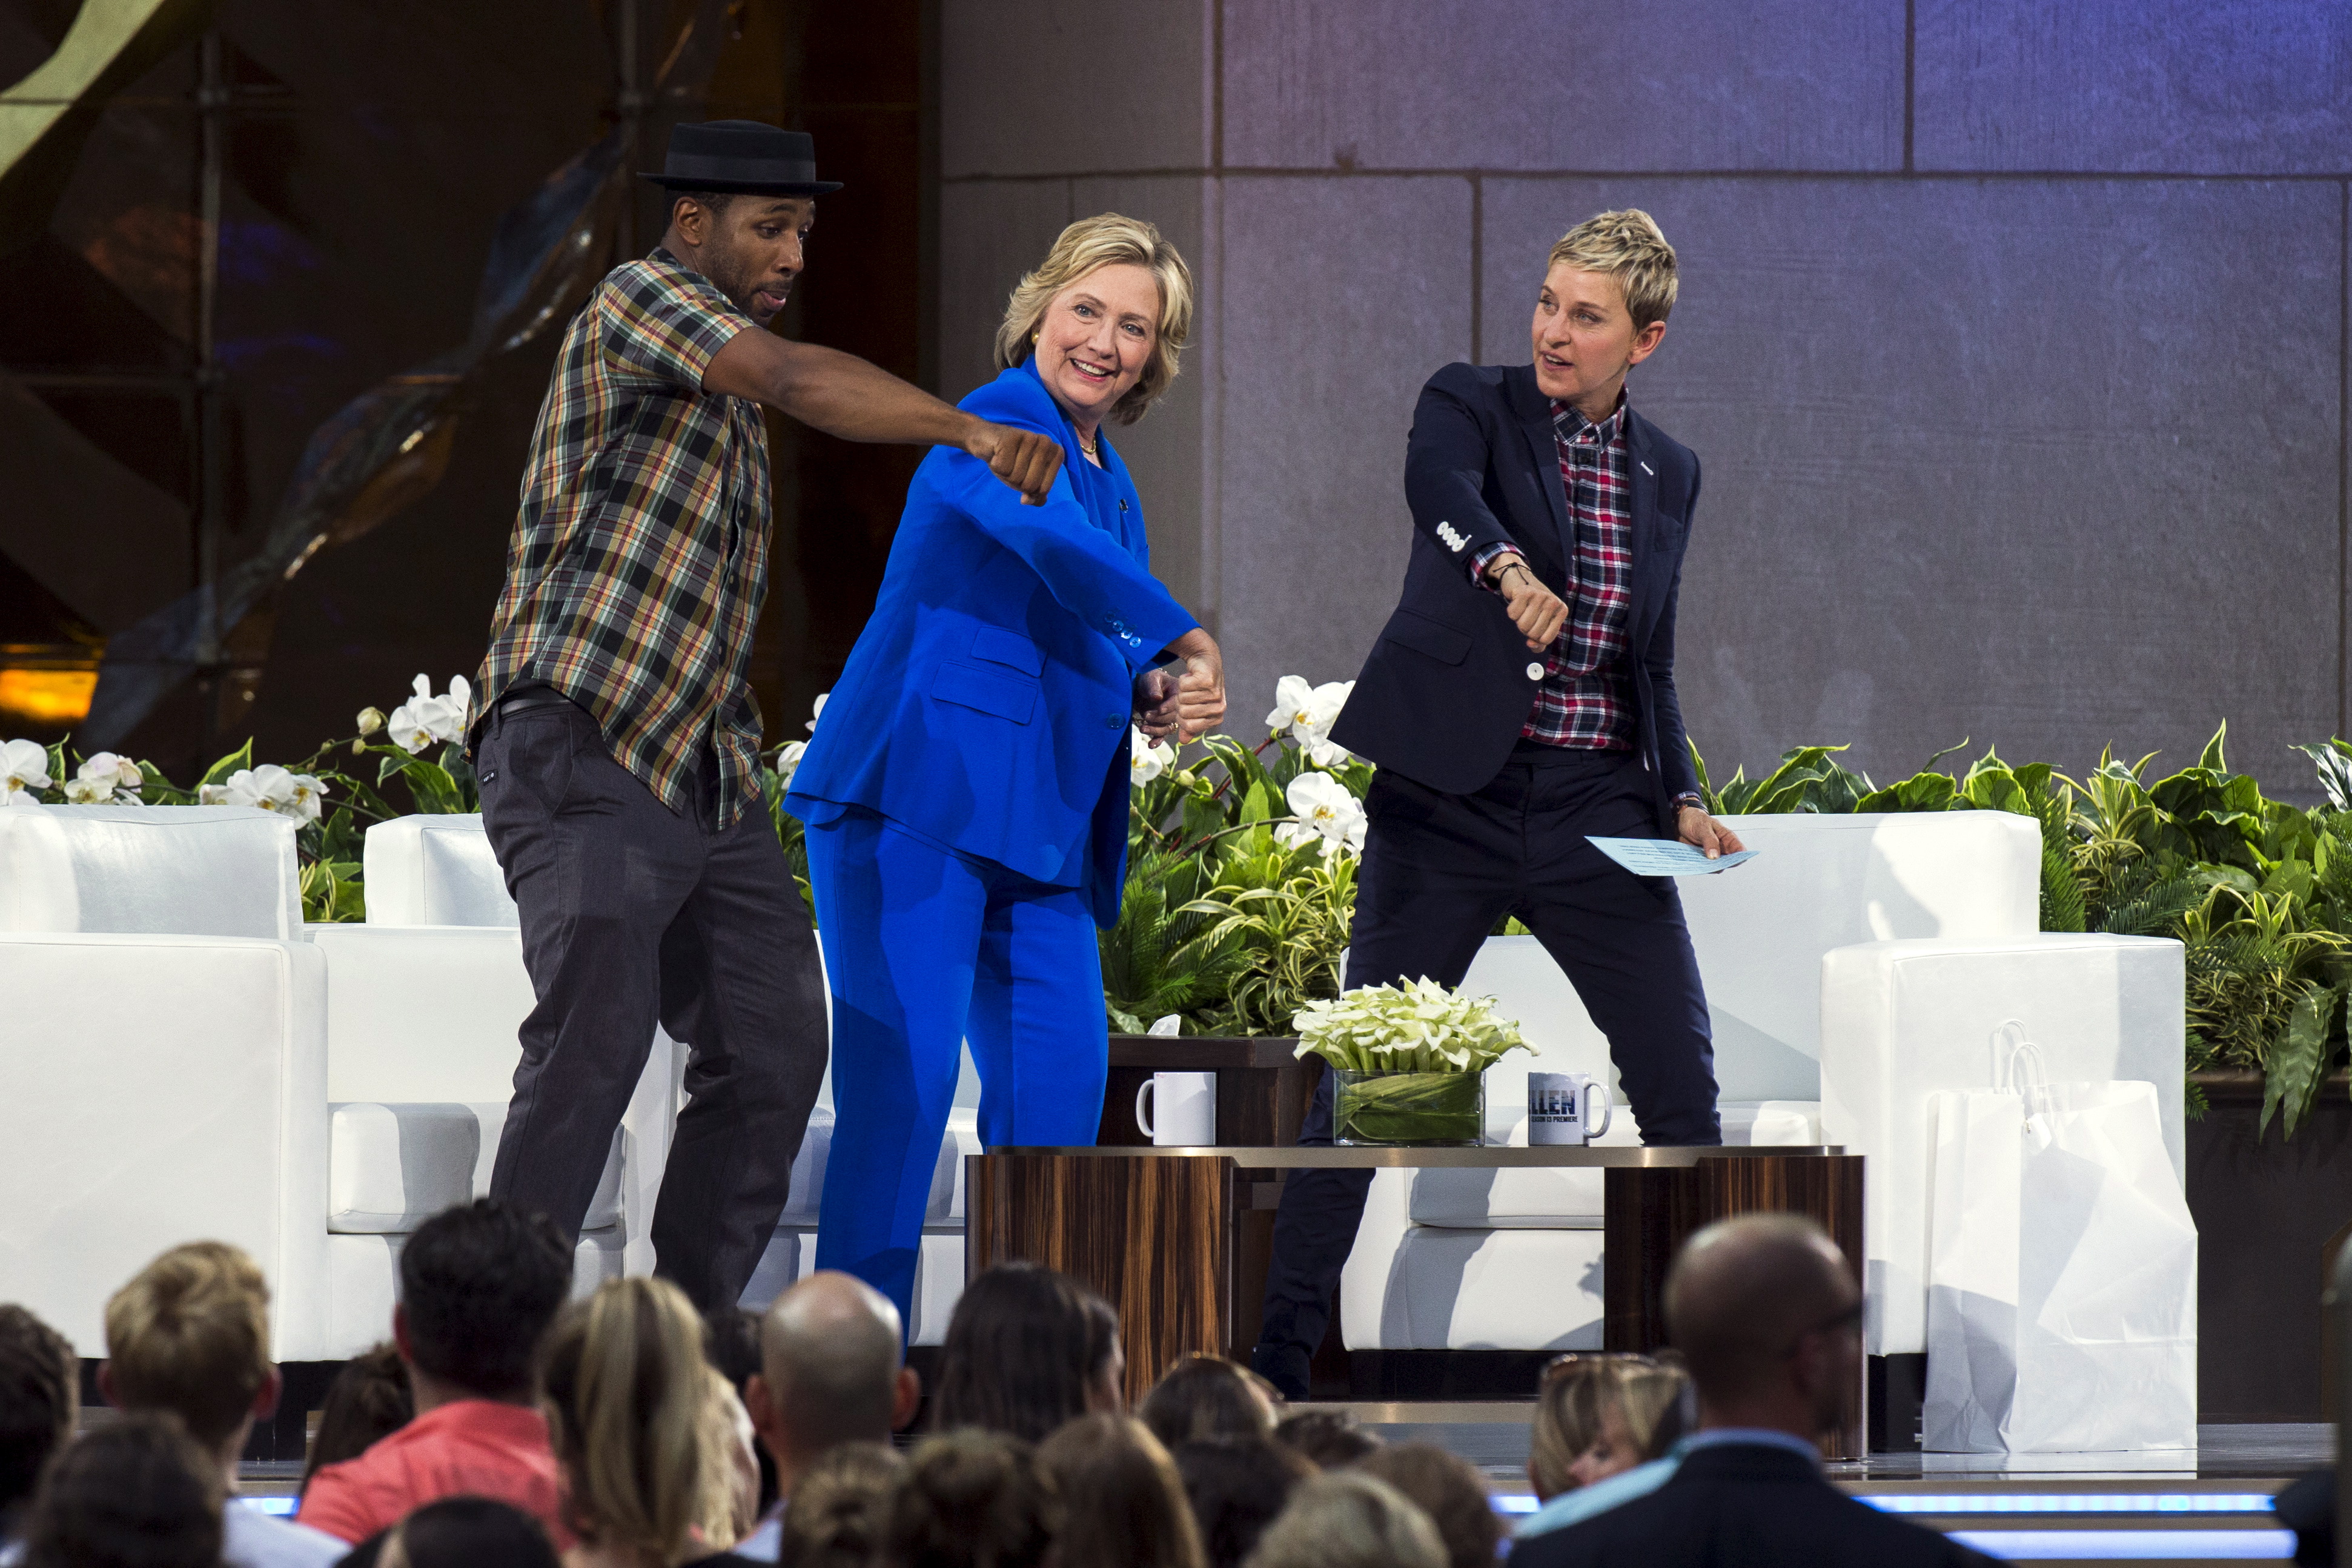 Hillary Clinton dances with DJ "Twitch" and Ellen DeGeneres during a taping of "The Ellen DeGeneres Show" in New York